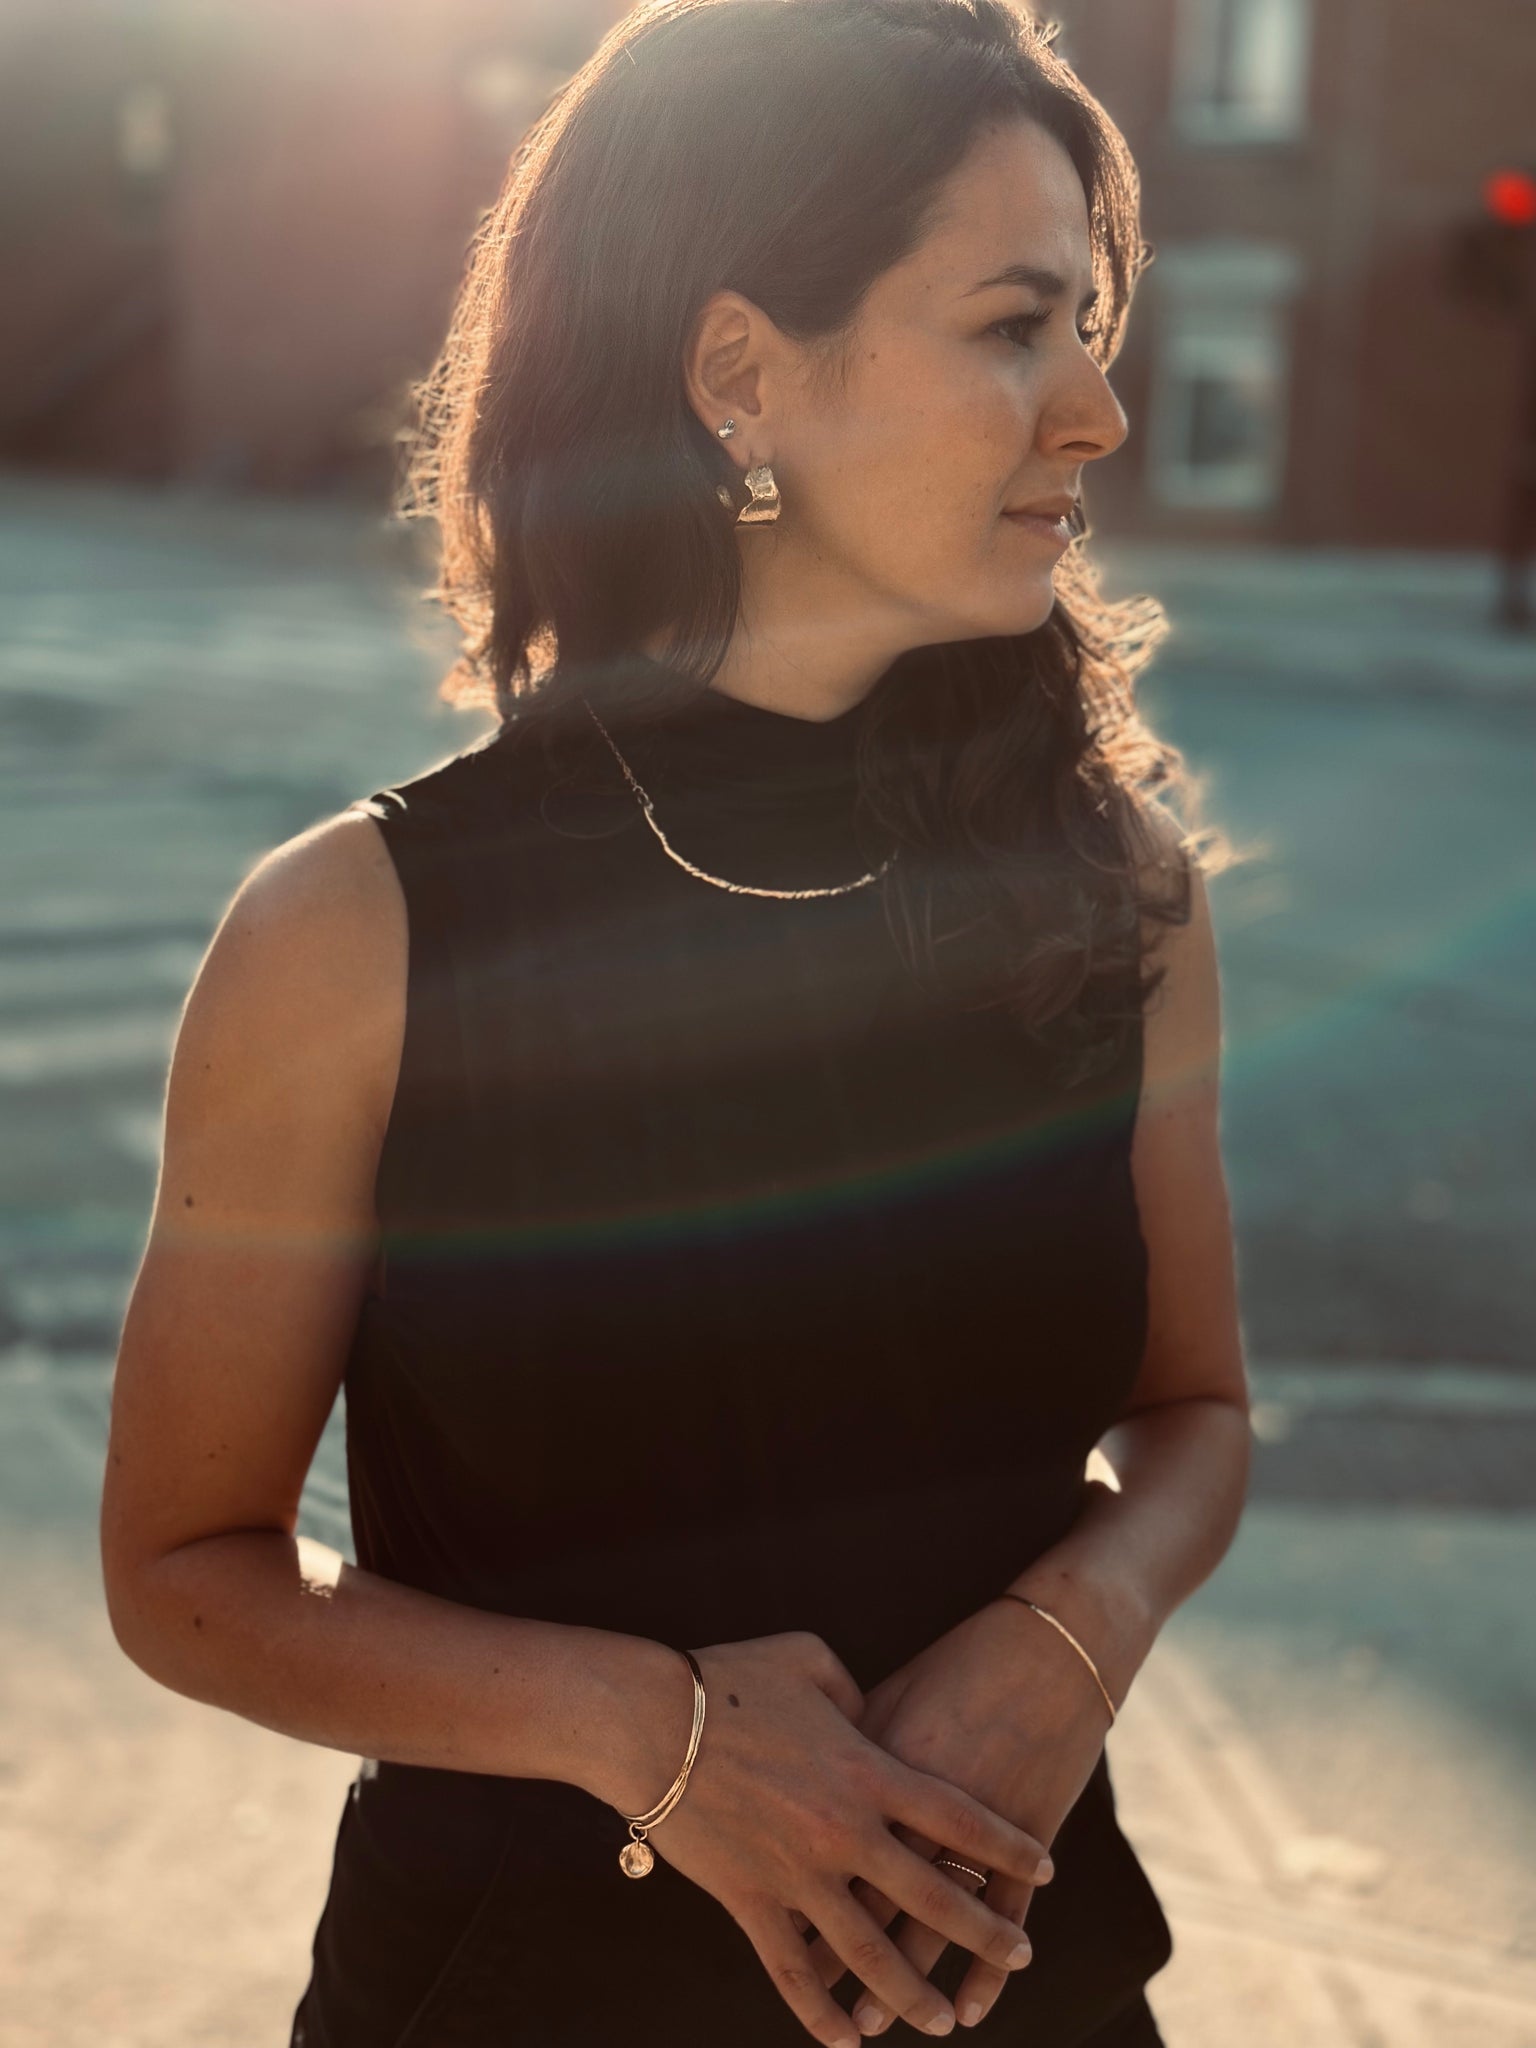 Woman in sunset light wearing a black sleeveless top, gold charm earrings, and a delicate gold bracelet.